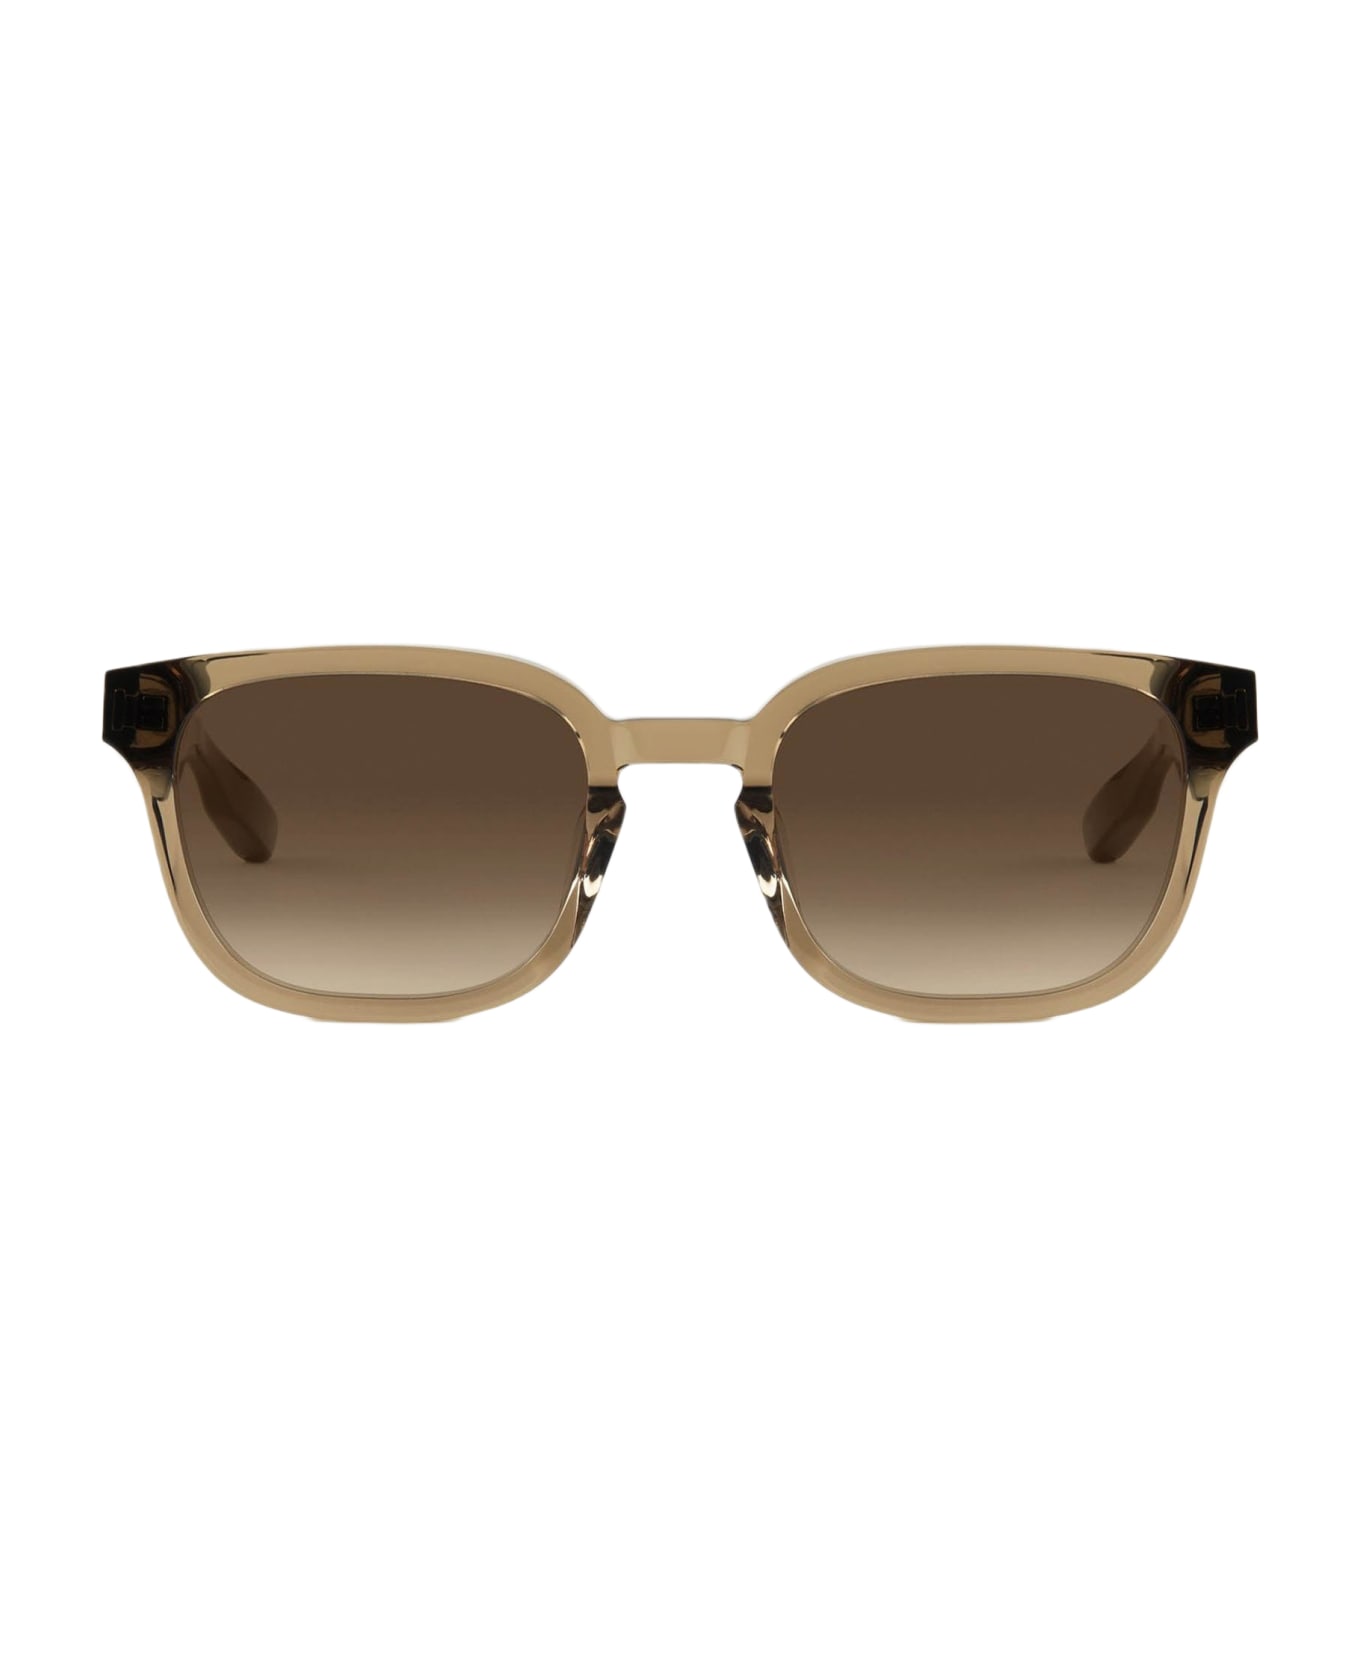 Aether Model S1 - Smoke Brown Sunglasses - brown